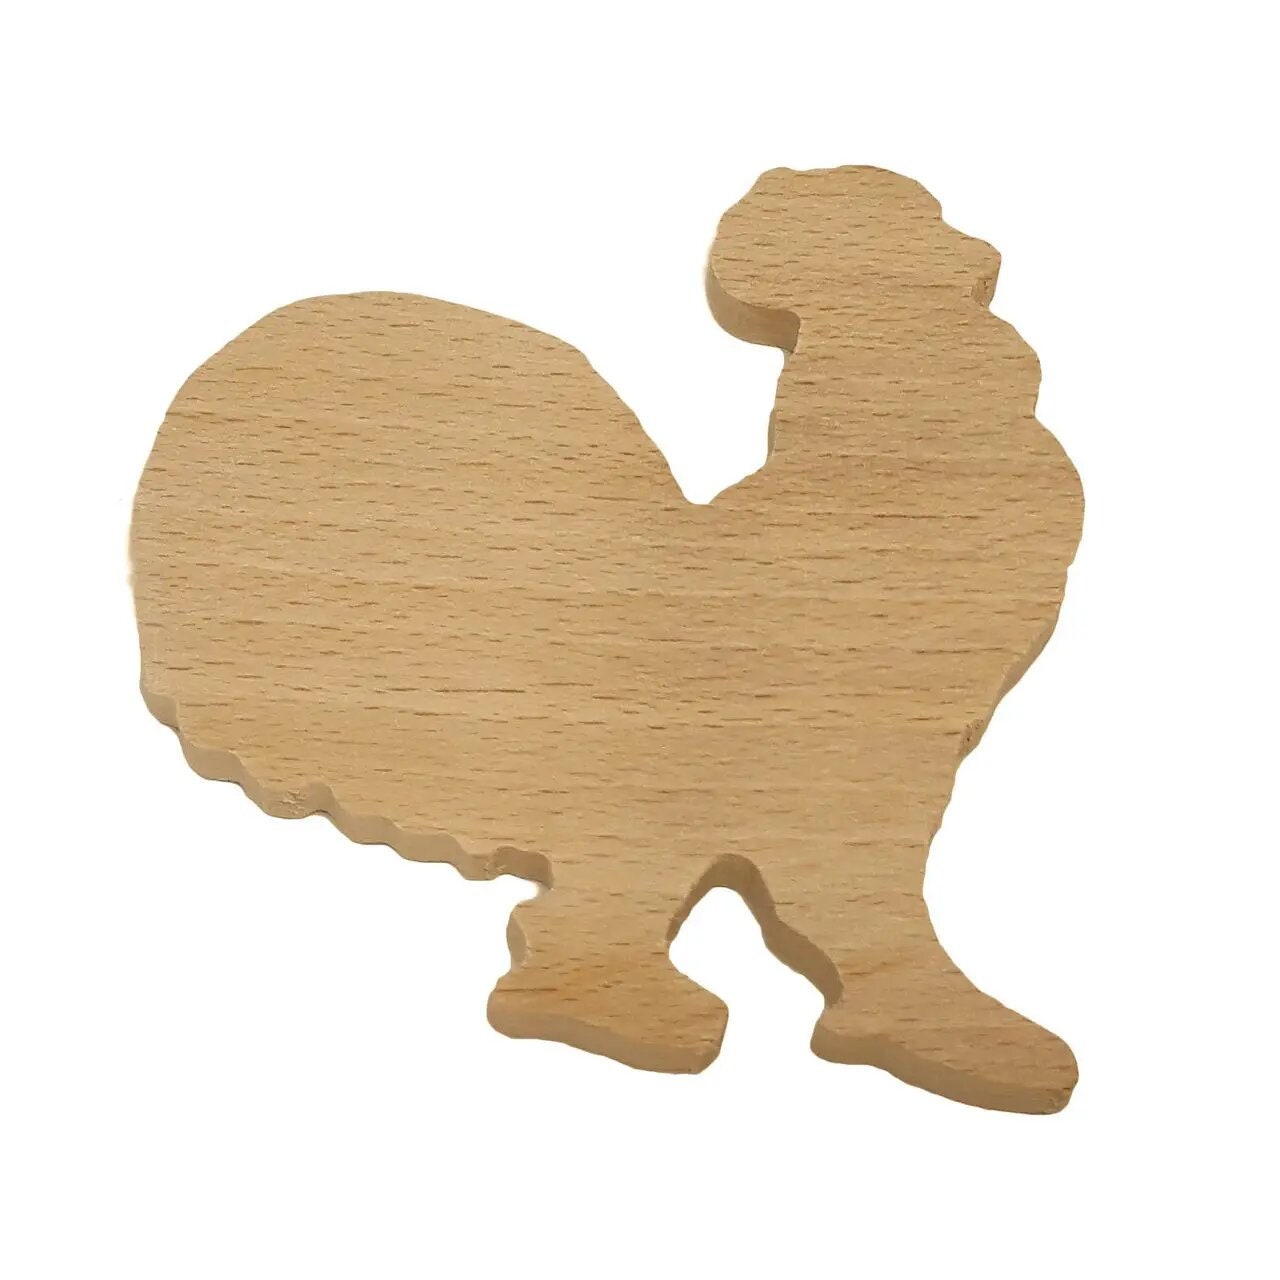 Dove Outline Shape, 3 20, Dove Cut Out, Laser Cut Unfinished Wood Shapes  for Crafts and Decorations, Bird Outline Cut Out 